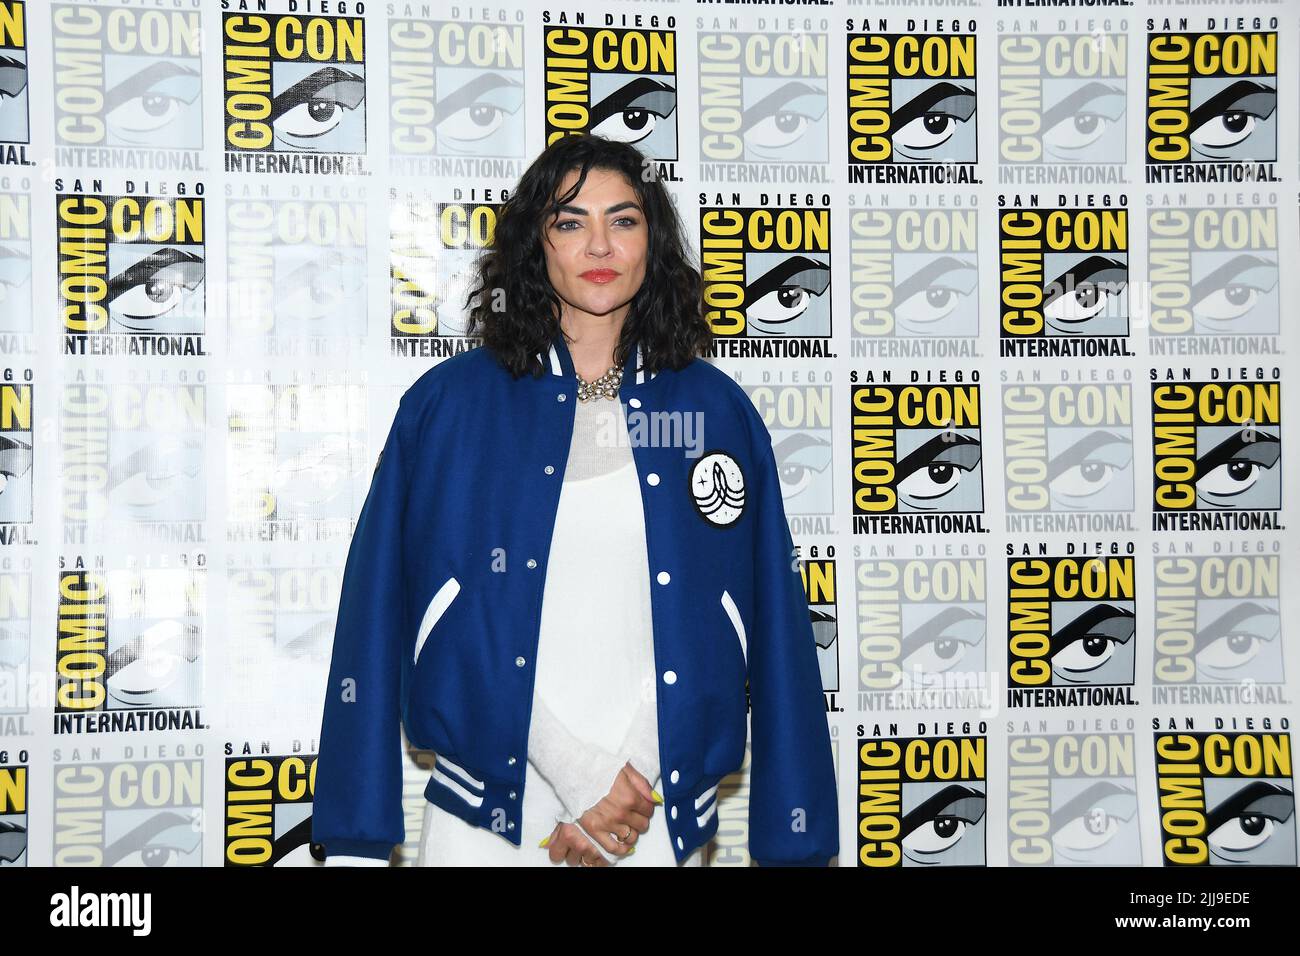 Jessica Szohr arrival at the Disney photocall for ‘The Orville’ at the Hilton Bayfront at San Diego International Comic-Con day 3 held on July 23, 202 Stock Photo